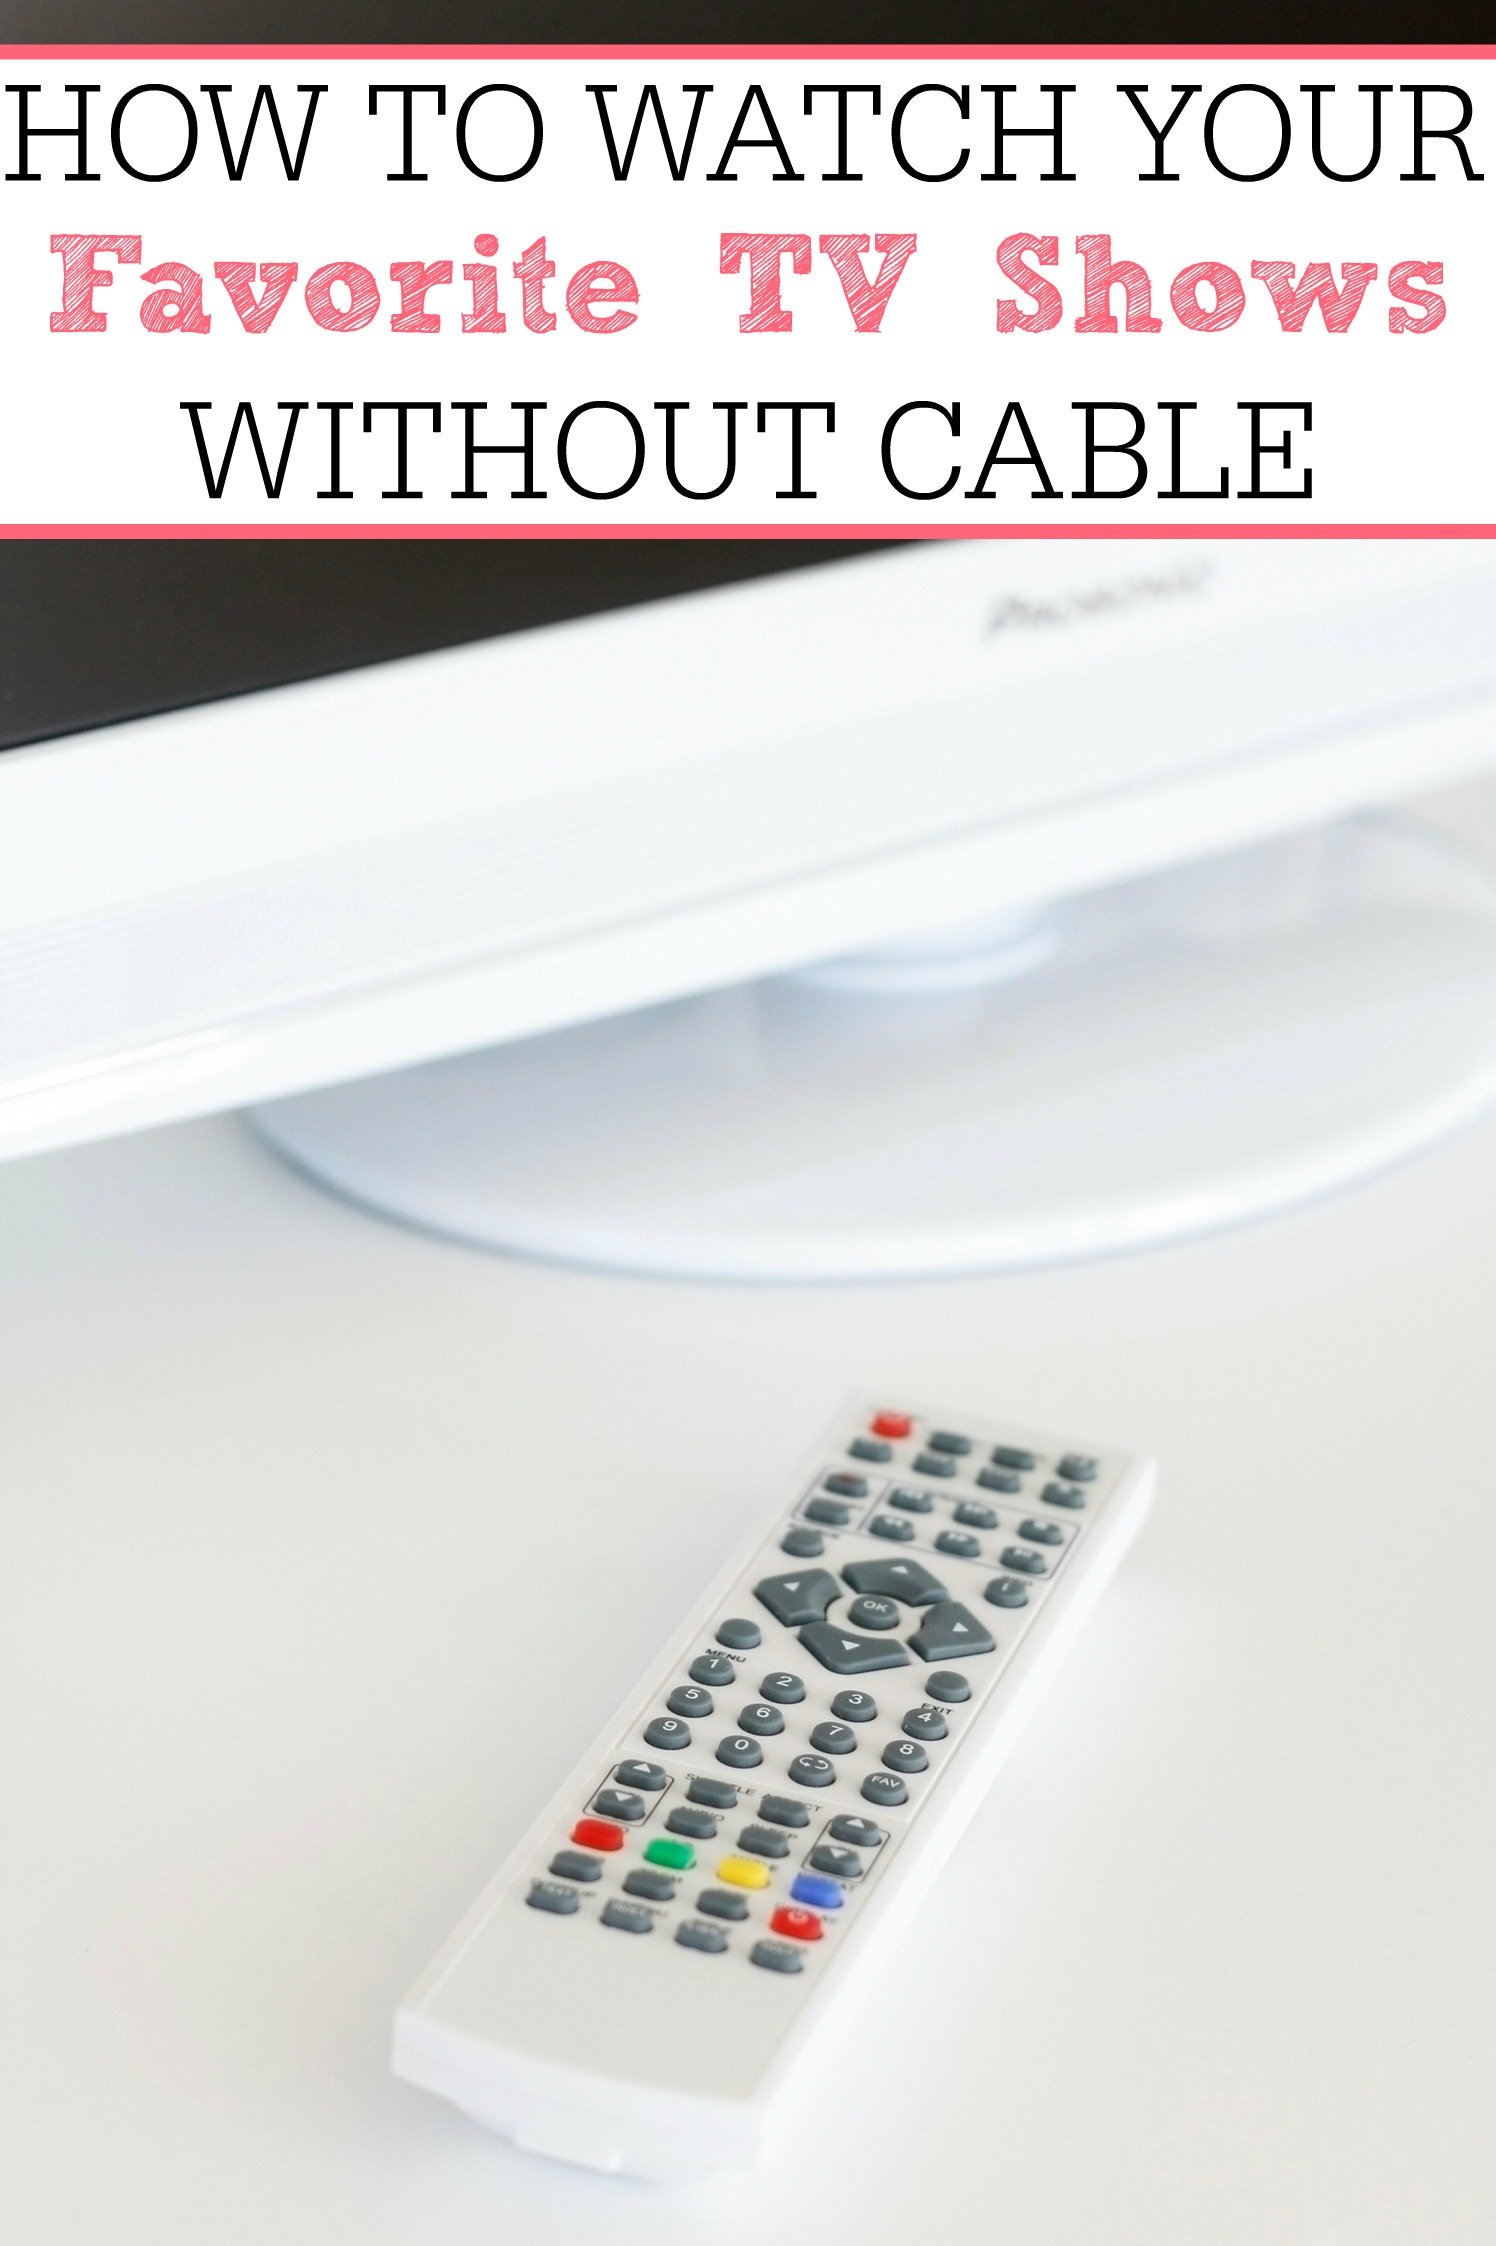 How To Watch Your Favorite TV Shows Without Cable ...